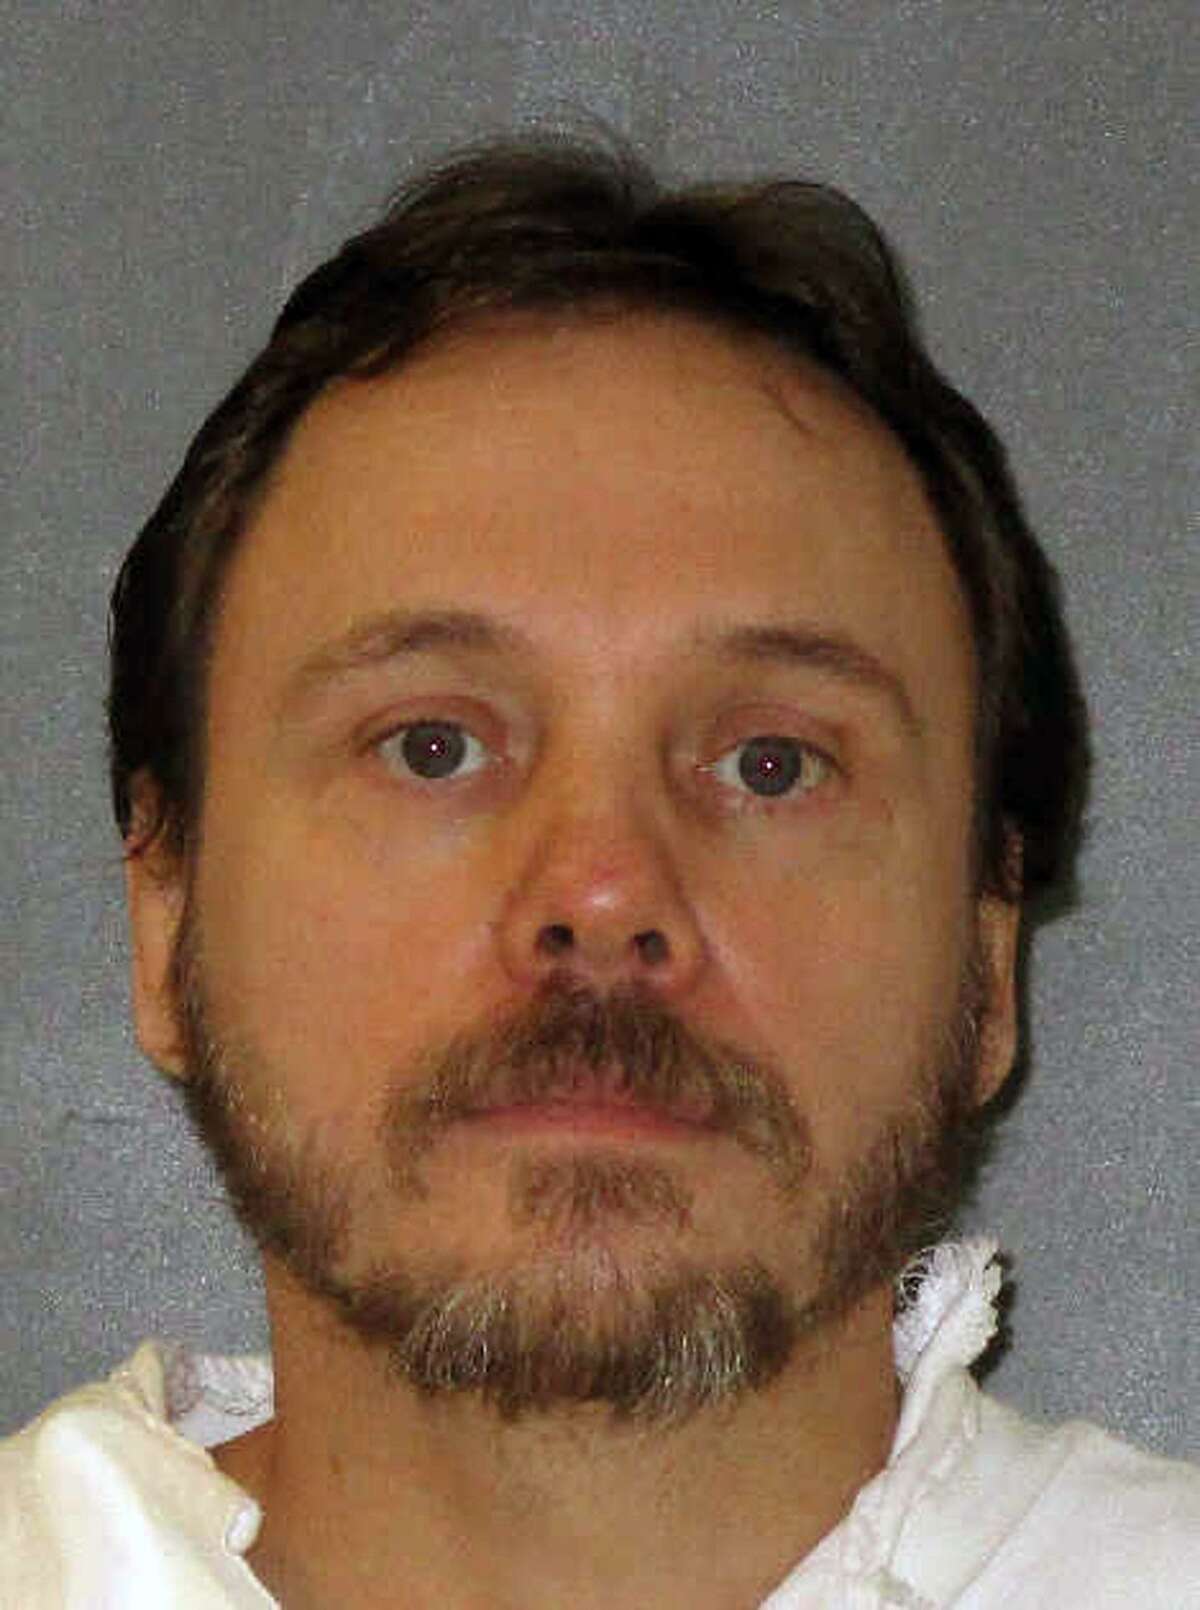 The Texas Court of Criminal Appeals refused an appeal from Charles Raby, 47, sent to death row in 1994 for the slaying of a 72-year-old woman, Edna Mae Franklin, at her Houston home.